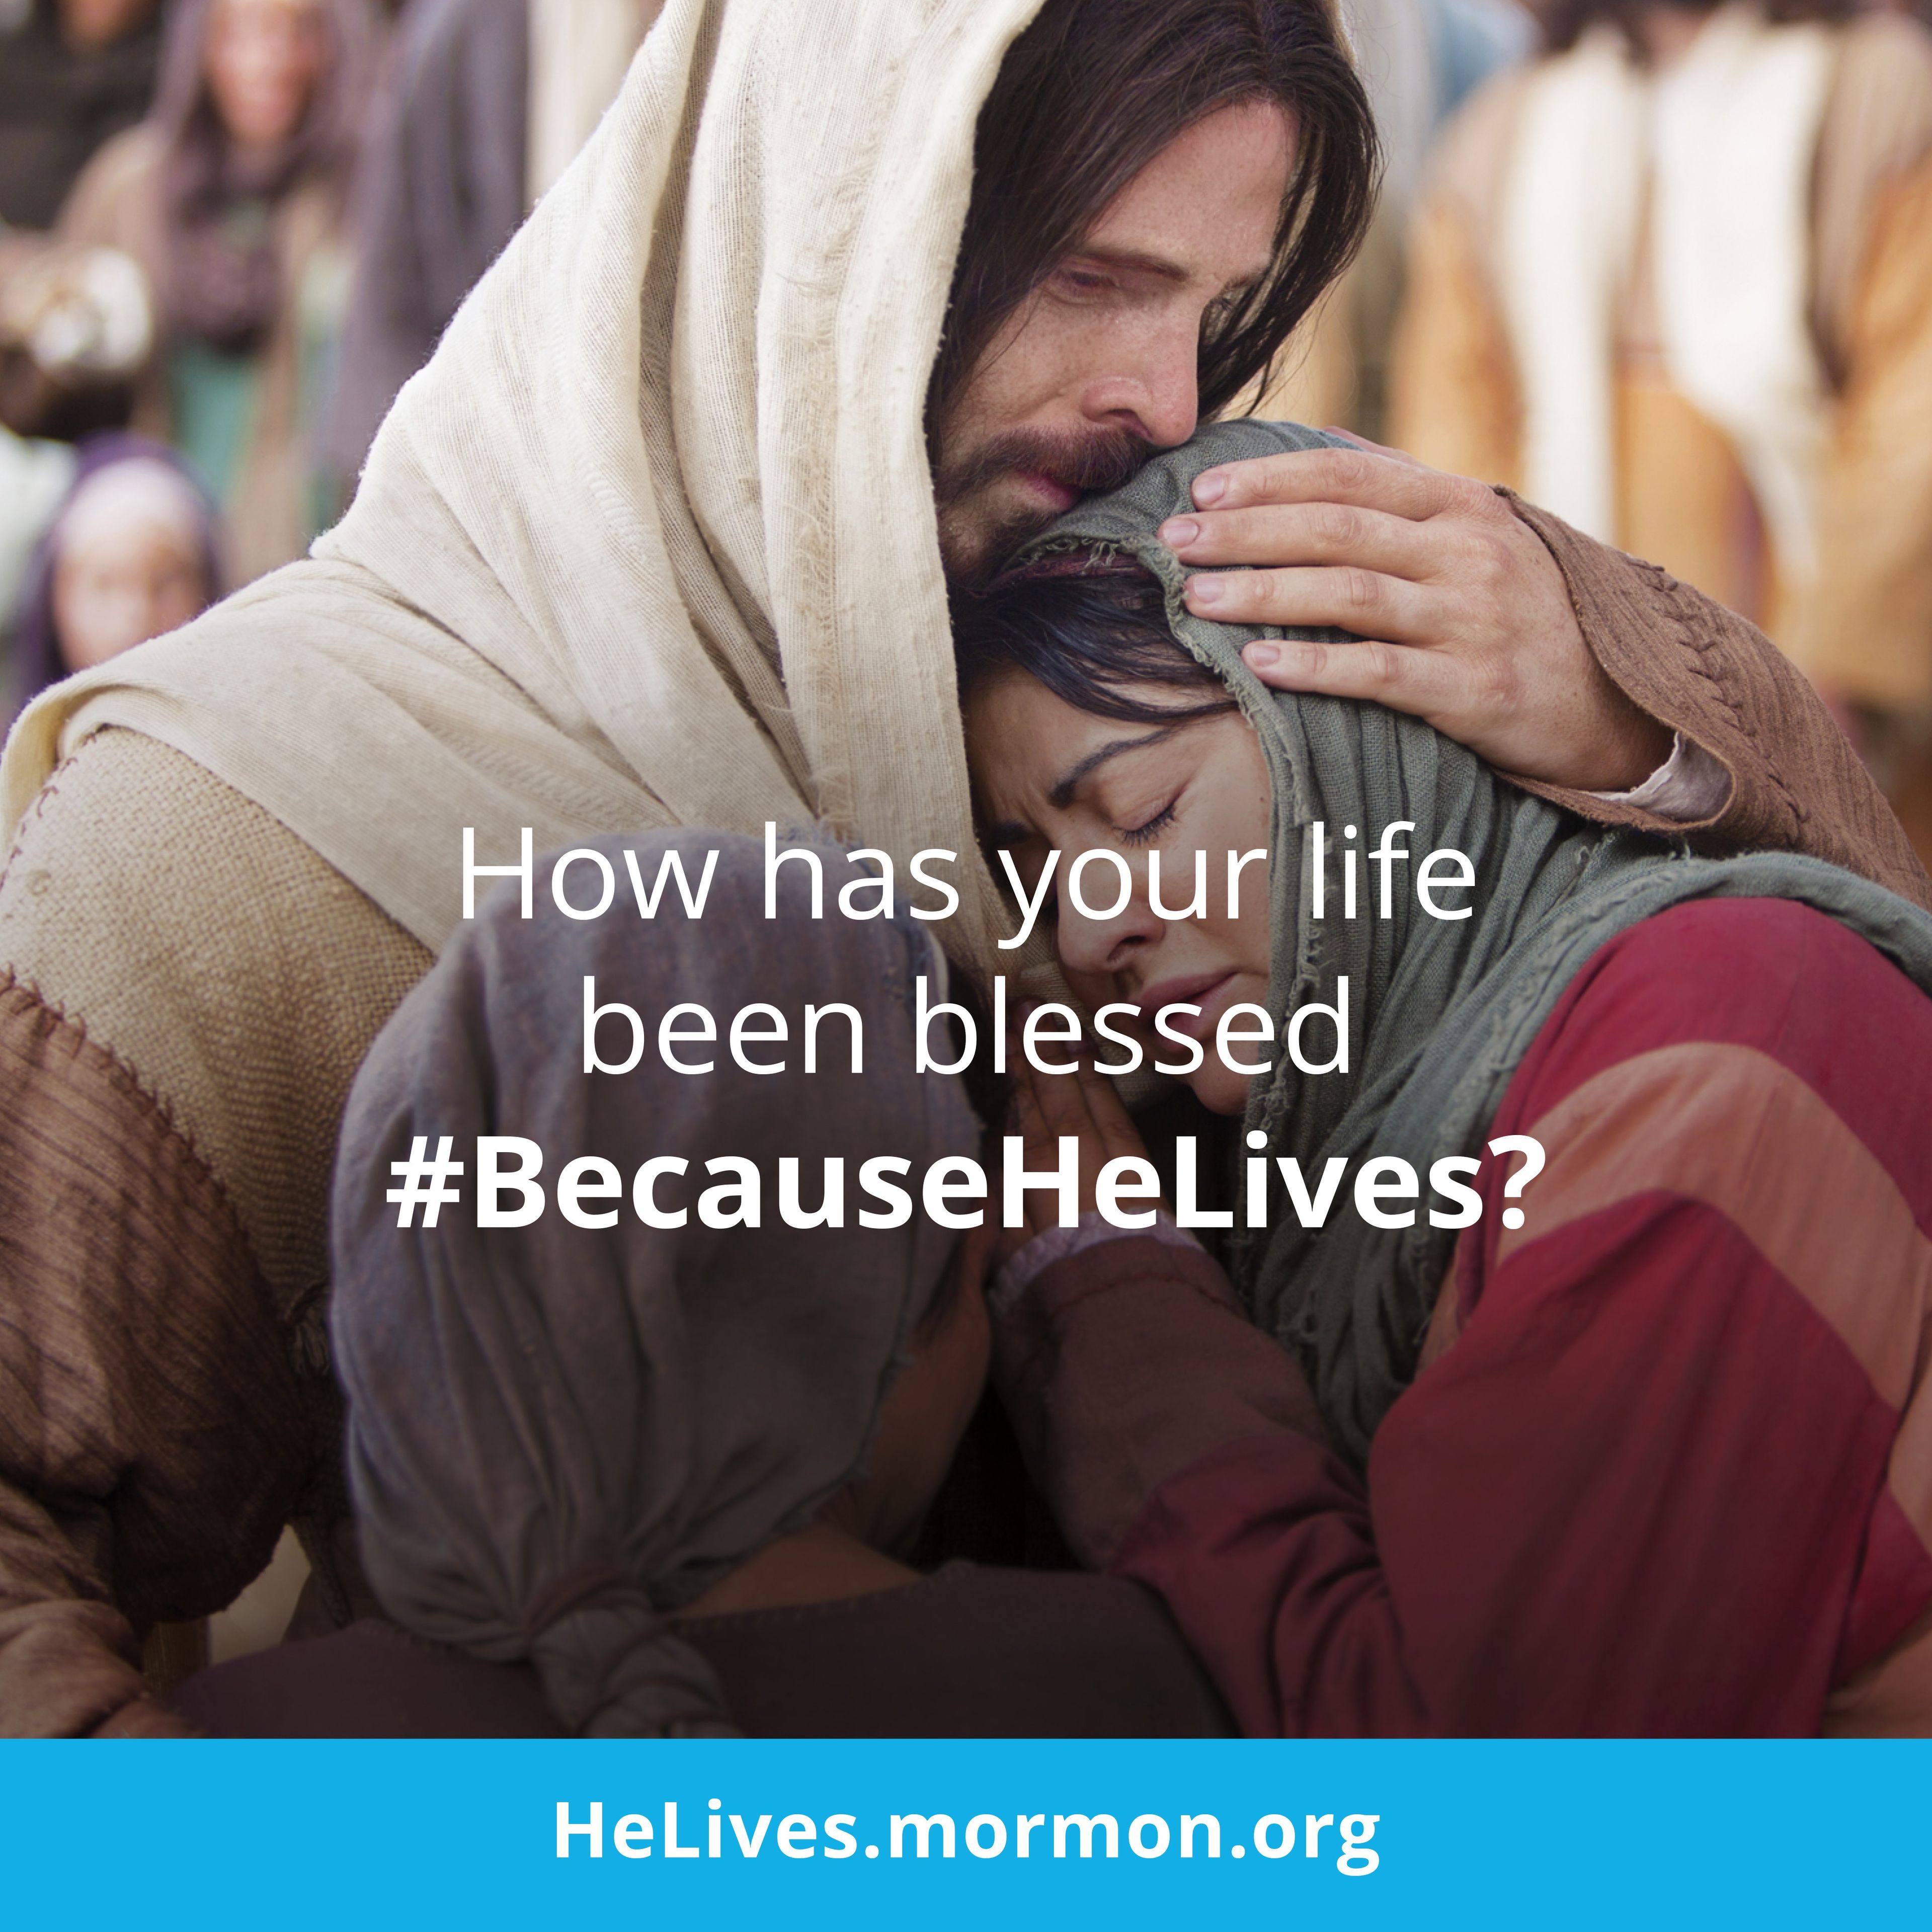 How has your life been blessed #BecauseHeLives? HeLives.mormon.org